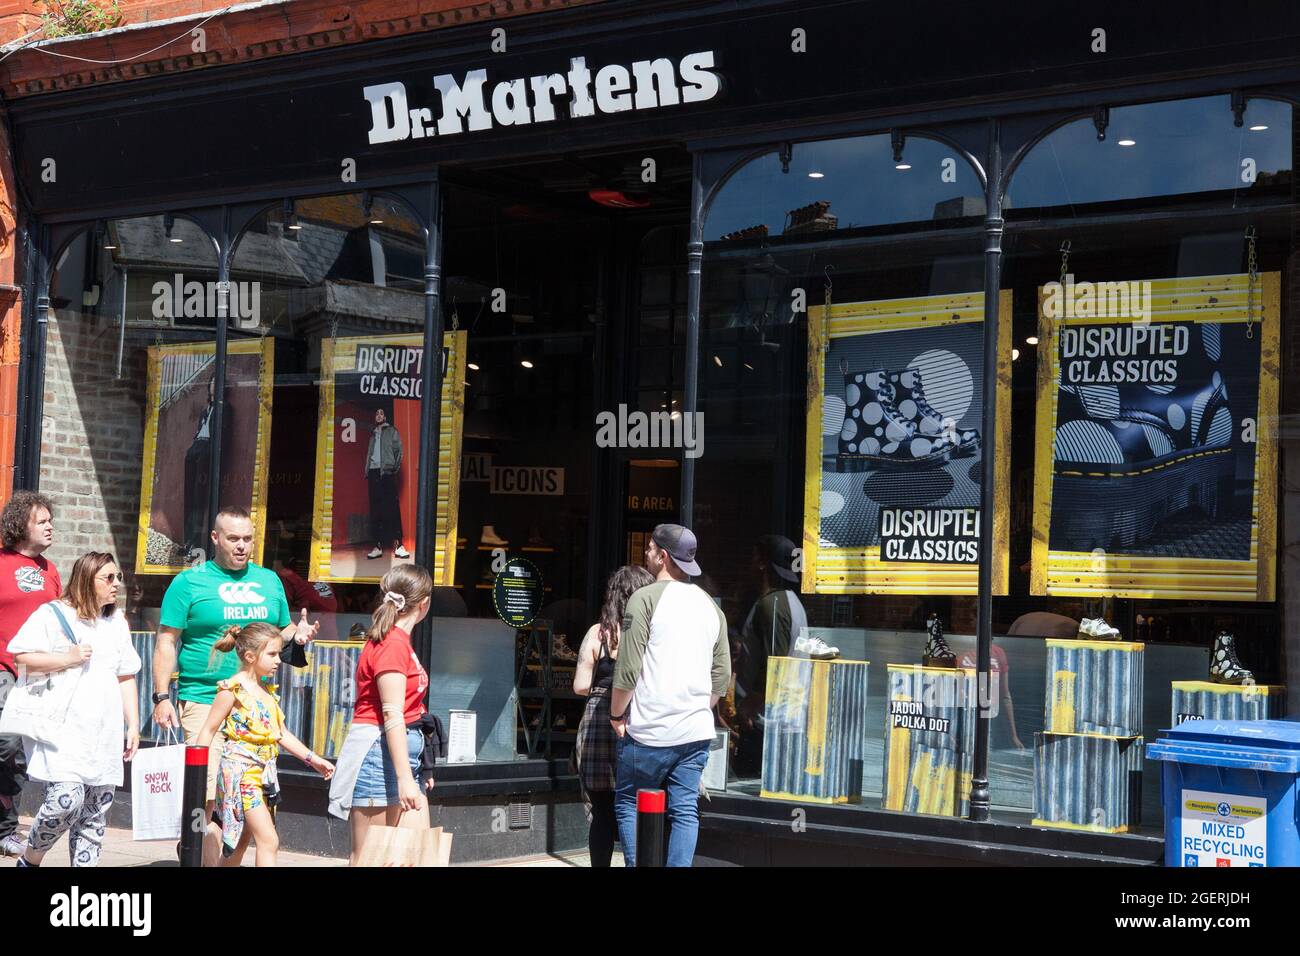 Dr. Martens shop and store in Brighton Stock Photo - Alamy